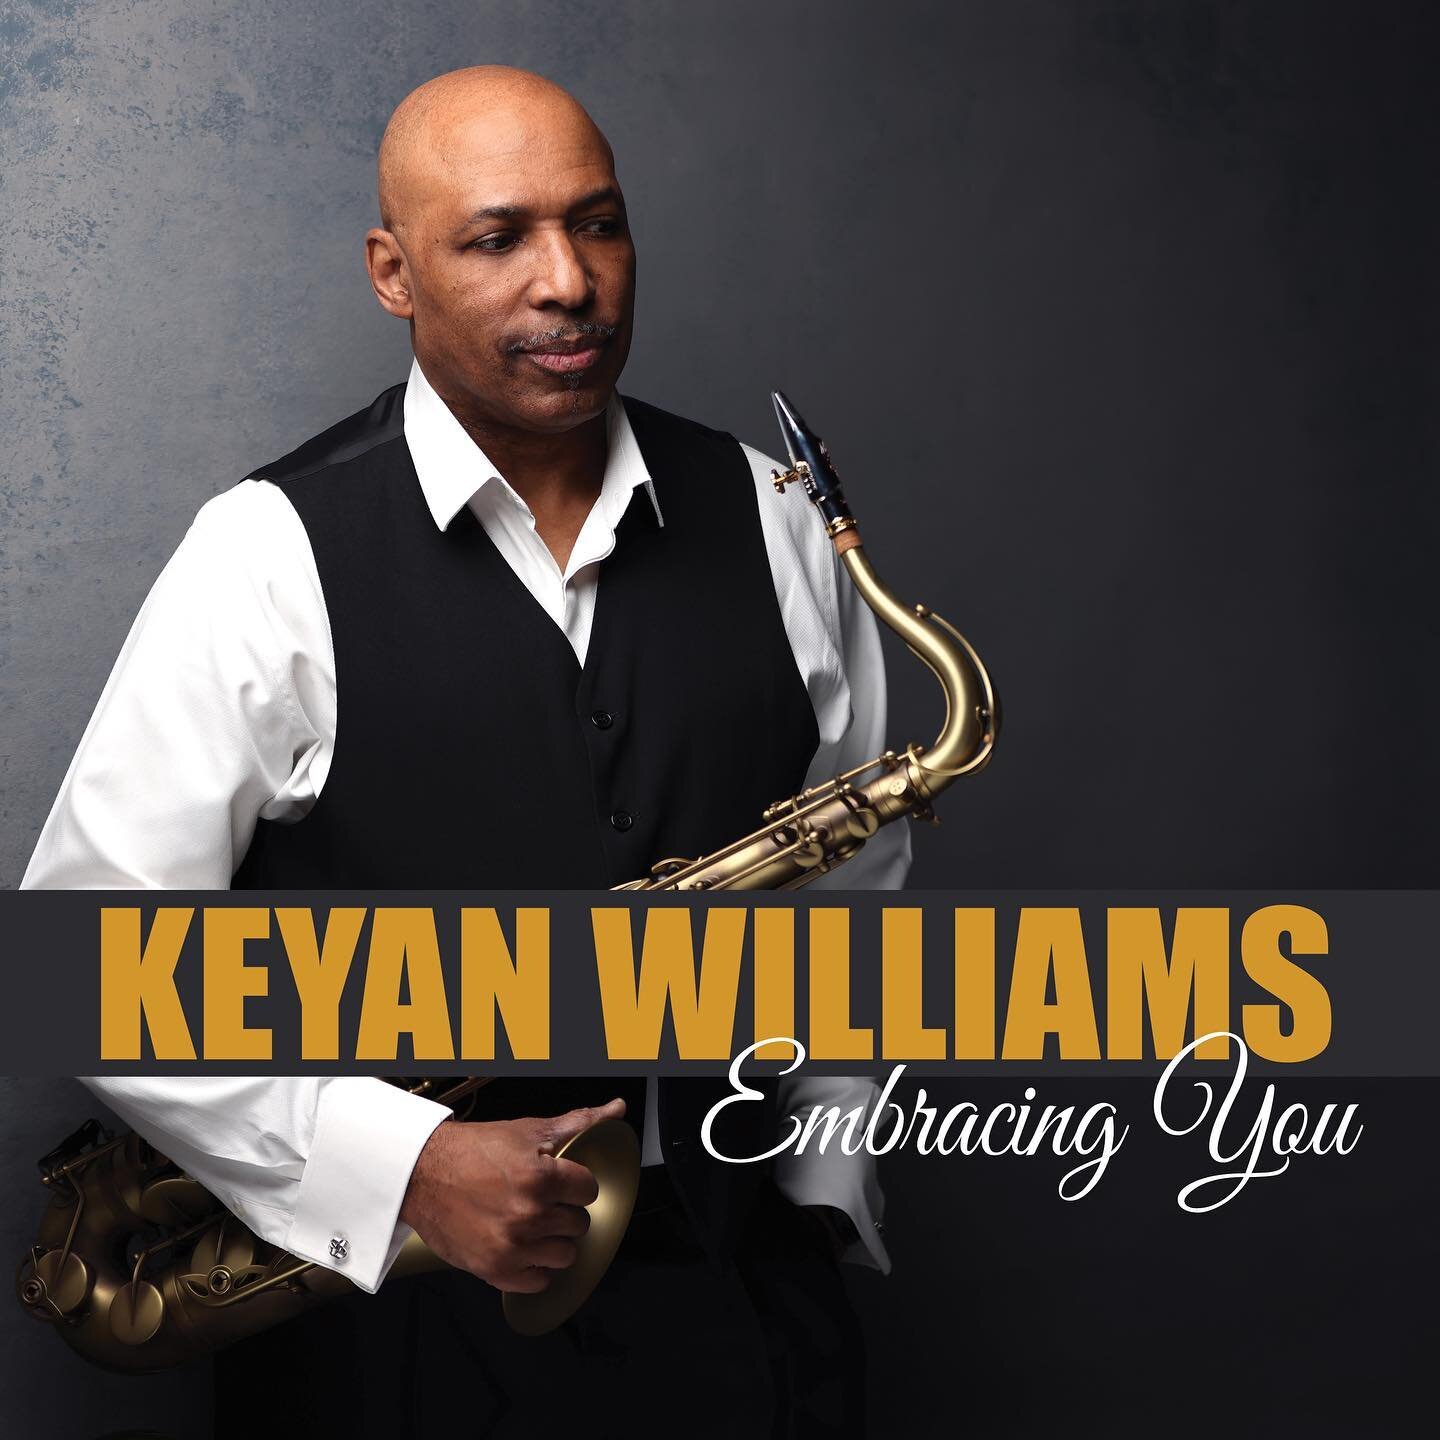 AVAILABLE NOW for purchase and streaming (link in bio), and GOING FOR ADDS at radio this coming MONDAY, April 10th! 

@side2music is proud to present the brand new single from saxophonist @keyanwilliams - Williams takes center stage with his brand ne